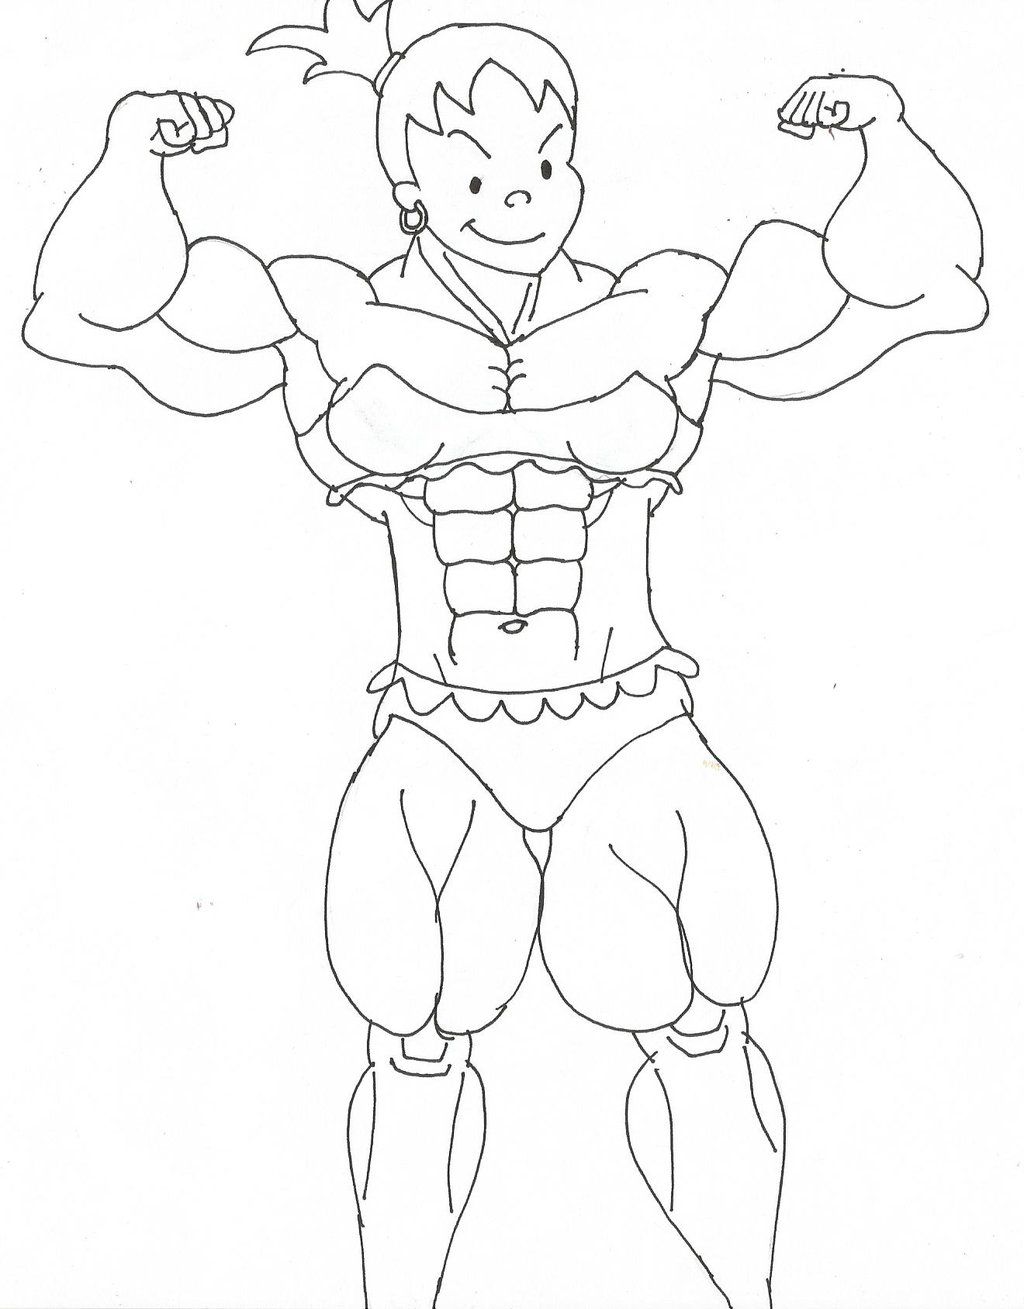 Muscular System Coloring Pages - Bestofcoloring.com